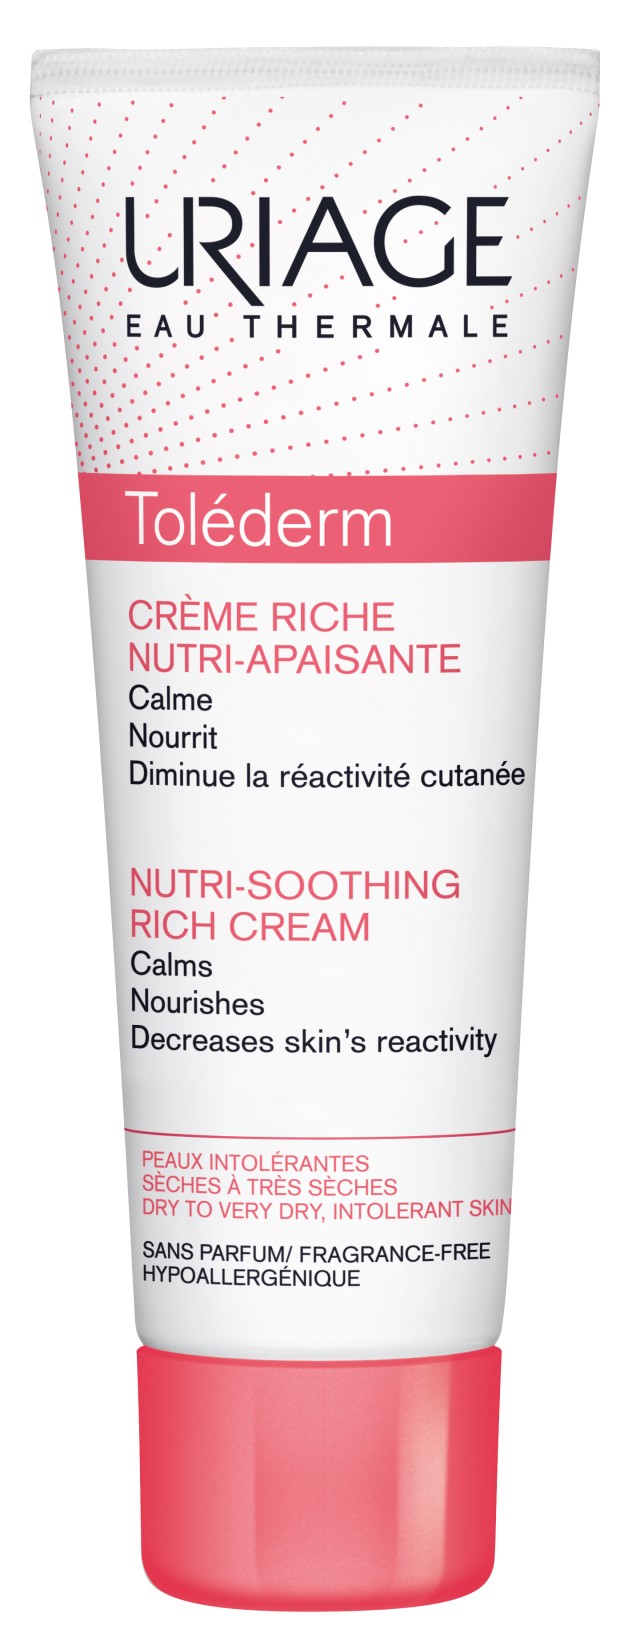 Uriage Tolederm Control Rich Soothing Care Κανονικές/Ξηρές 40ml